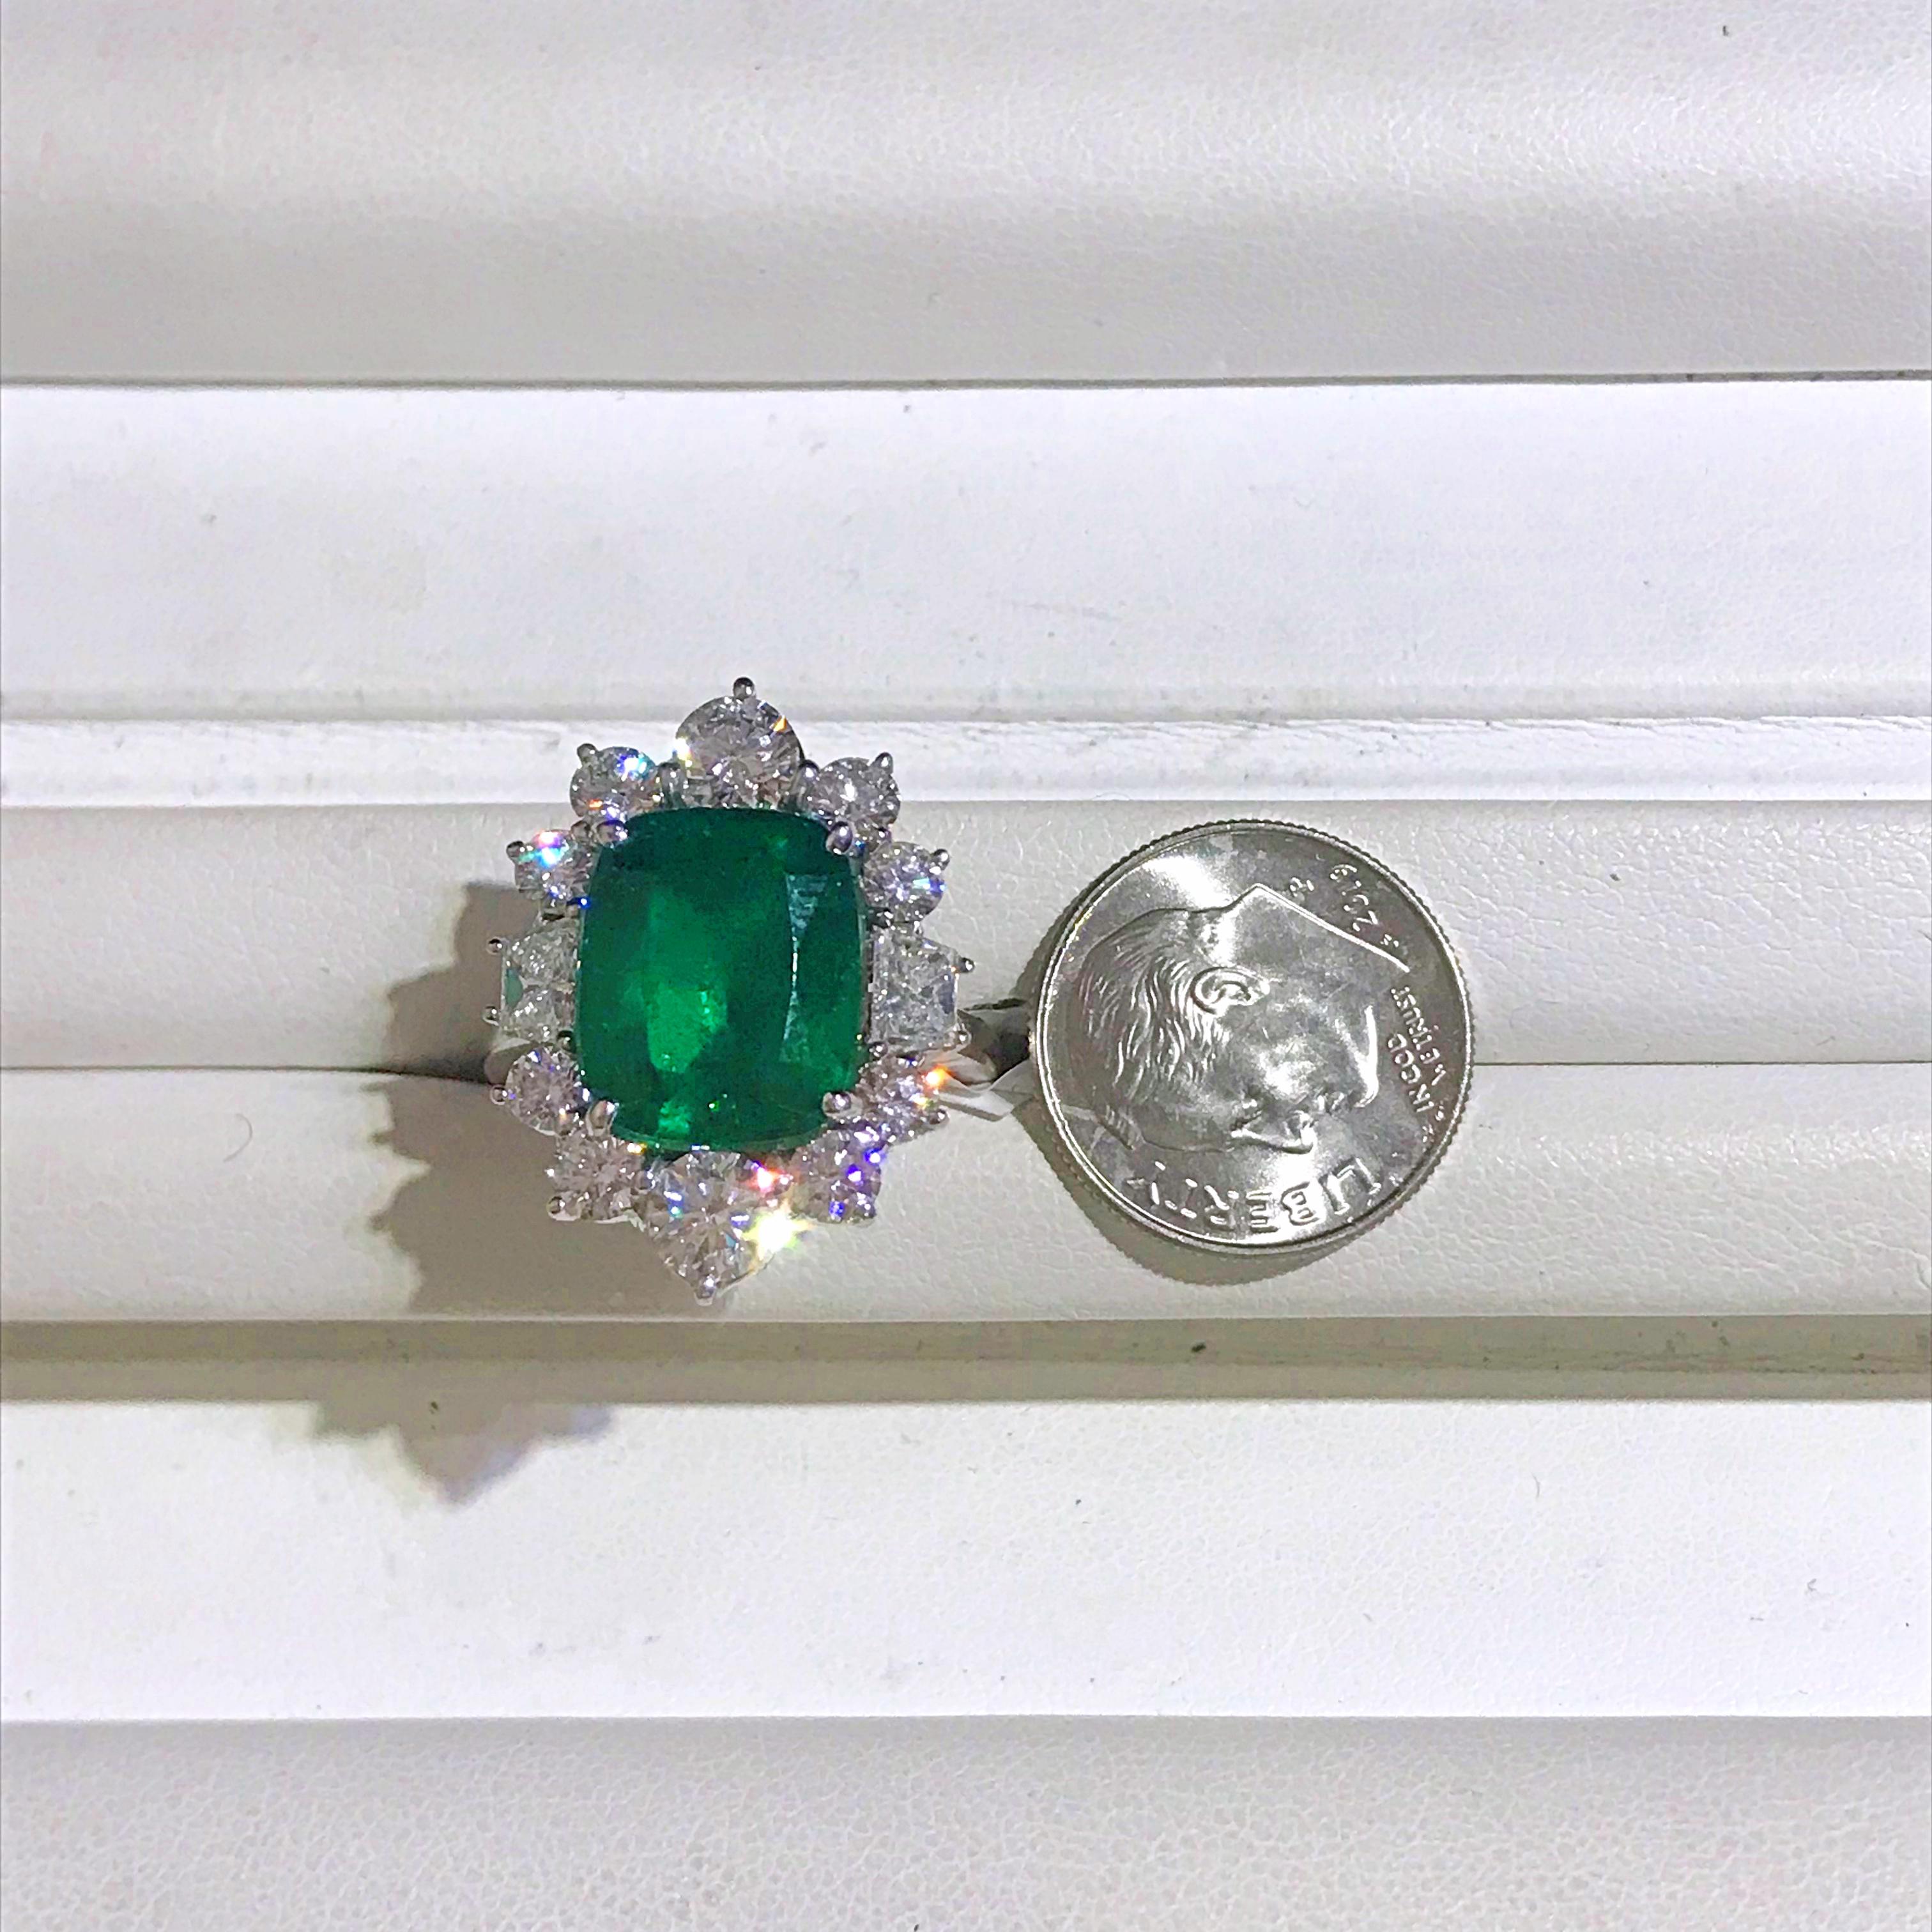 This rich colored Emerald weighs 5.69 carats and is surrounded by an elegant halo of 12 Diamonds totaling 2.60 carats. The ring is crafted from Platinum and currently a size 6.75. This ring is sizeable. Please let us know if we can help or answer